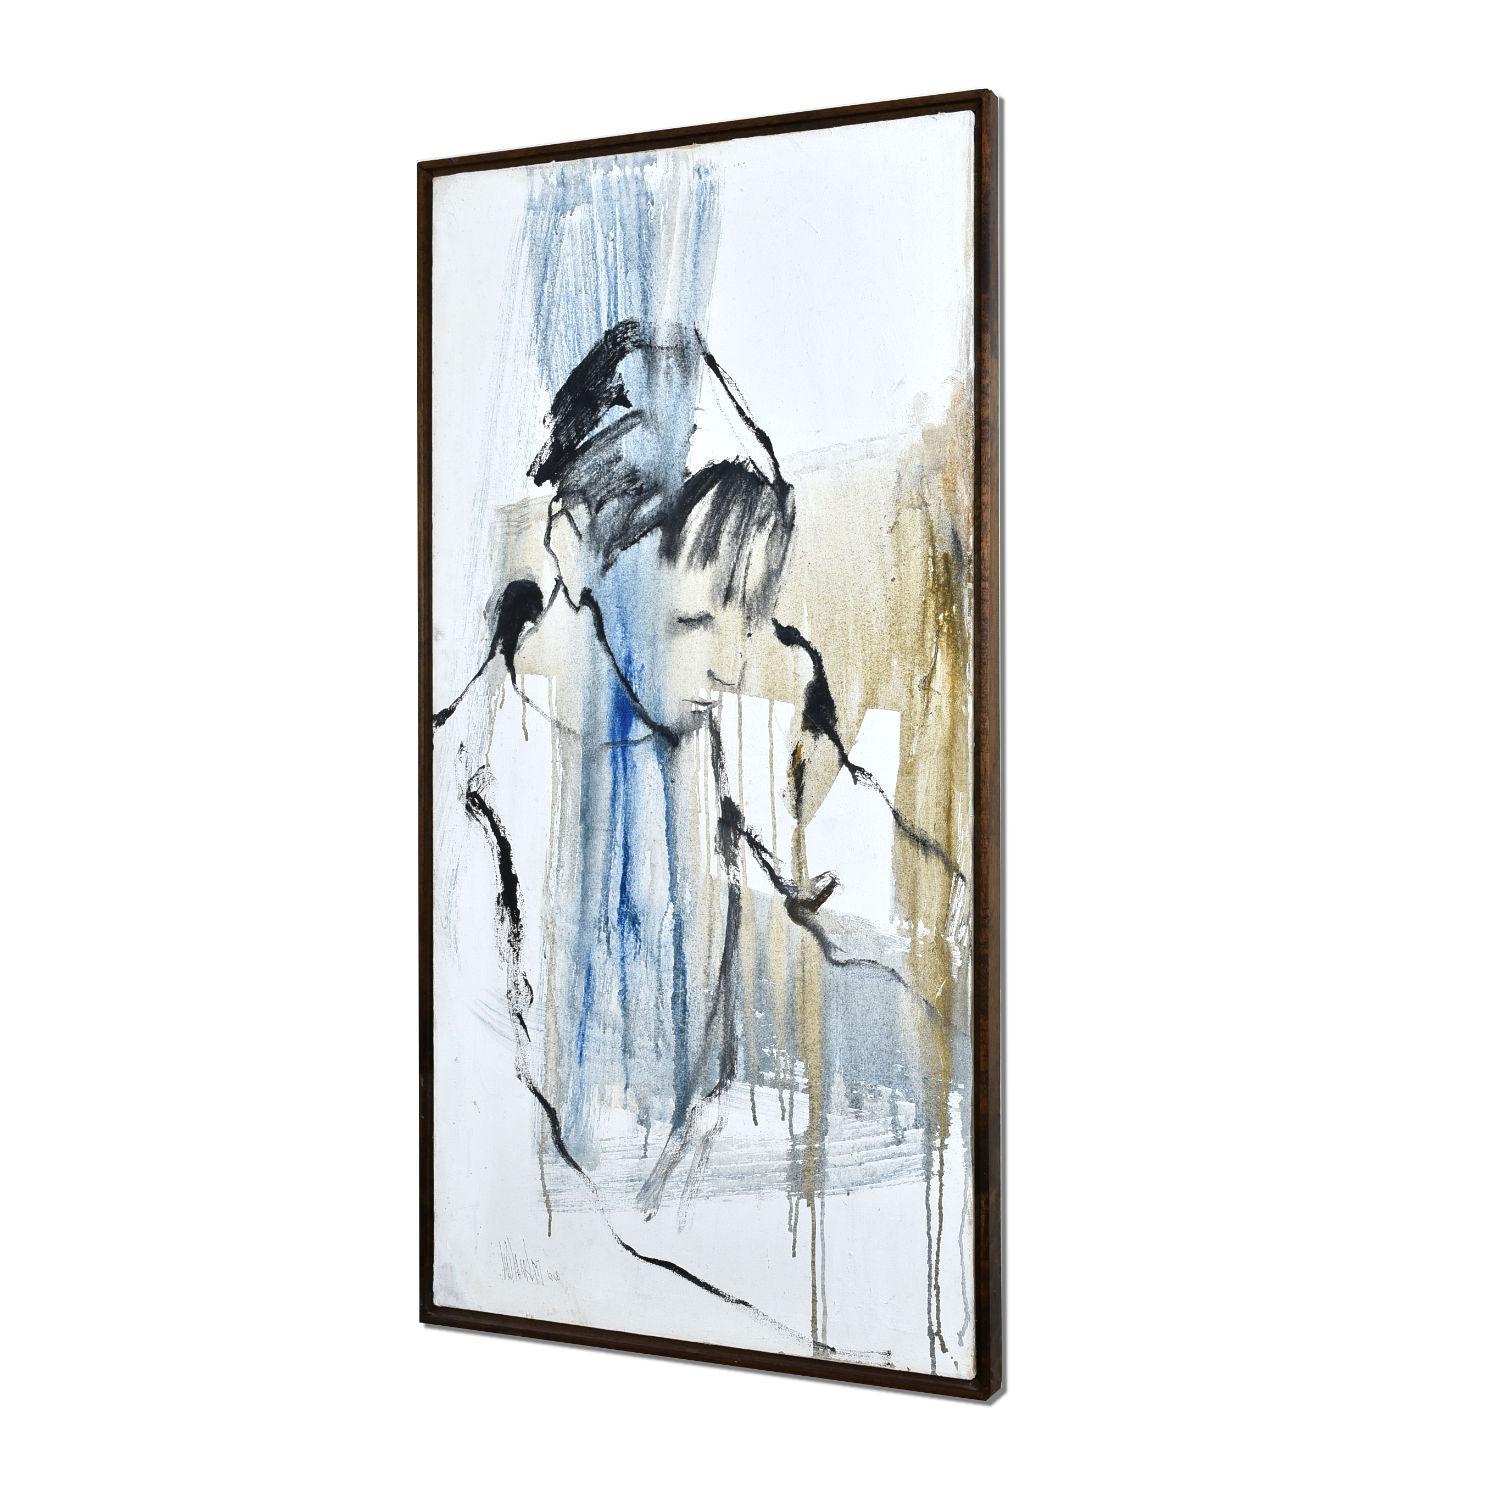 There is something about this solemn portrait that lures you in. Rendered in gestural strokes reminiscent of Franz Kline, the figure cuts across the austere white. The stark field of white is tempered with an ethereal wash of blue and ochre hues.